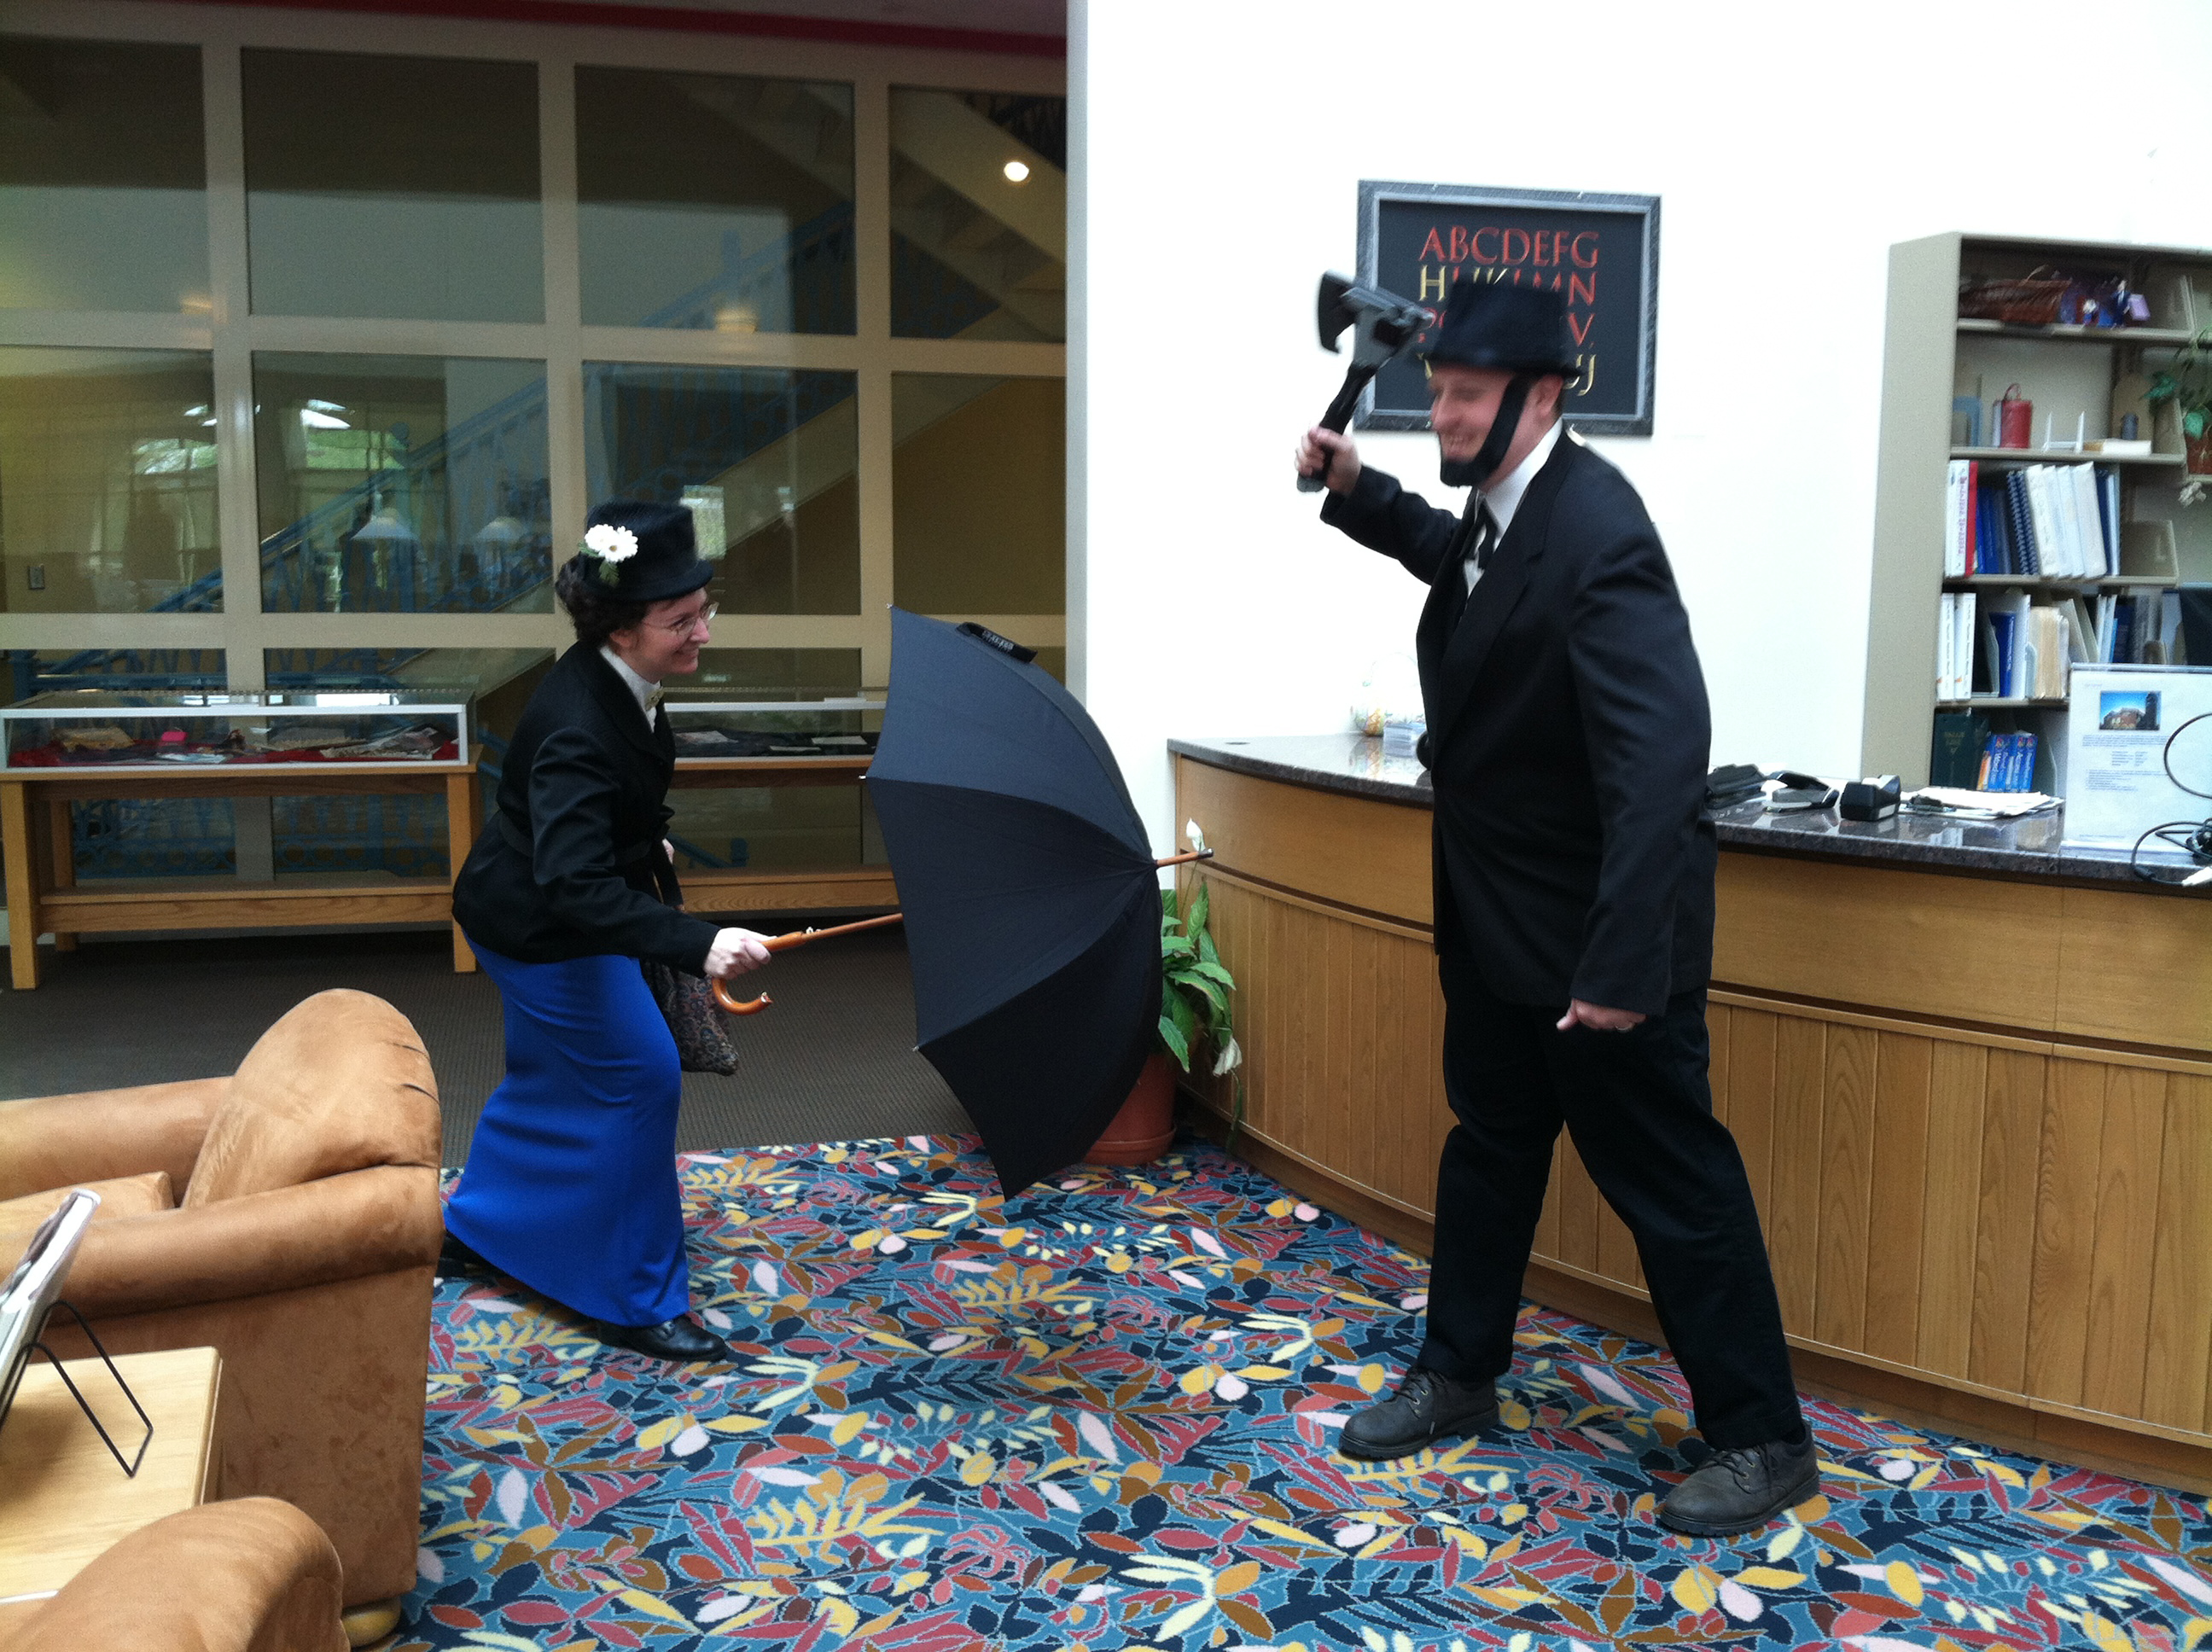 Mary Poppins and Abraham Lincoln, depicted by St. Ambrose University Library staffers, stage a mock battle during Dress Like a Literary Character Day at the Davenport, Iowa, university. Other events inlcuded the 11th annual Paper Plane Flying Contest and a life-sized Angry Birds game.